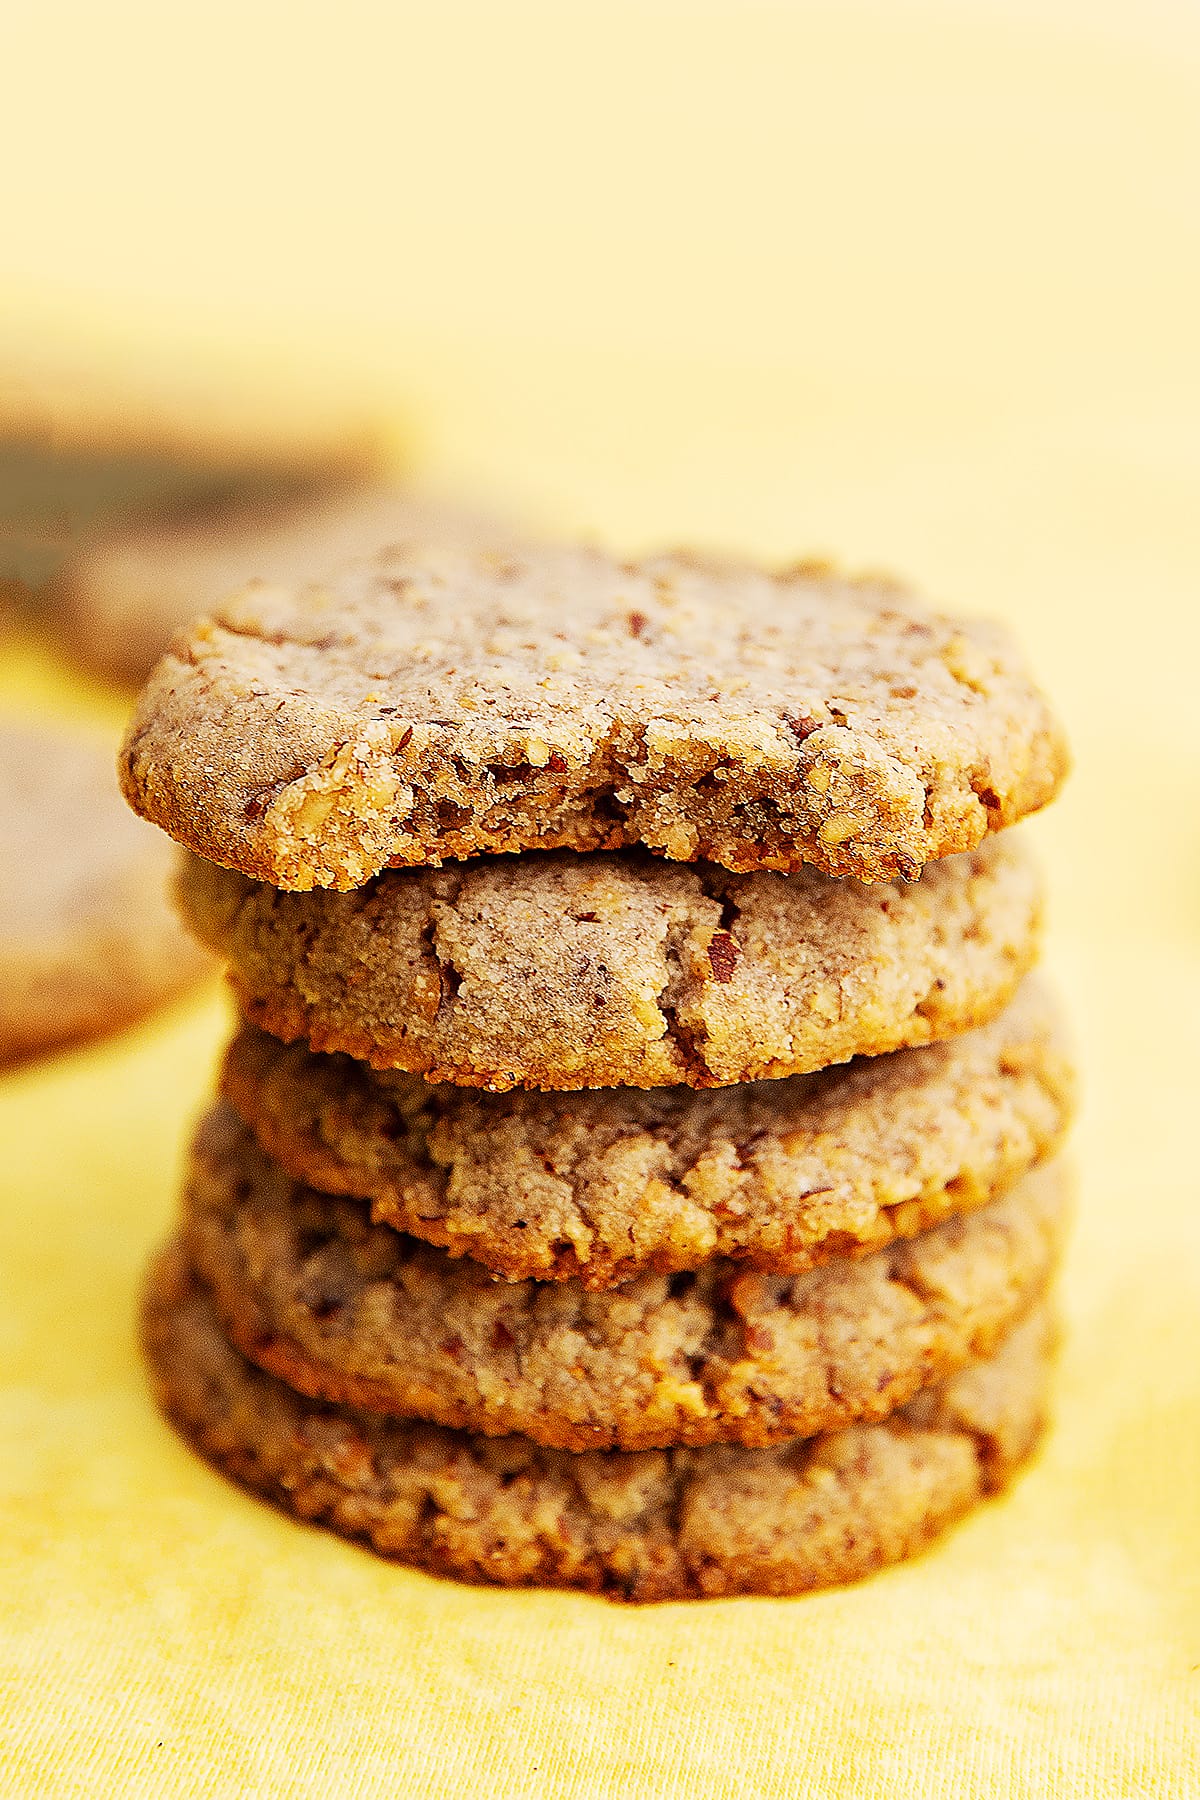 a stack of 4 pecan cookies on a yellow background